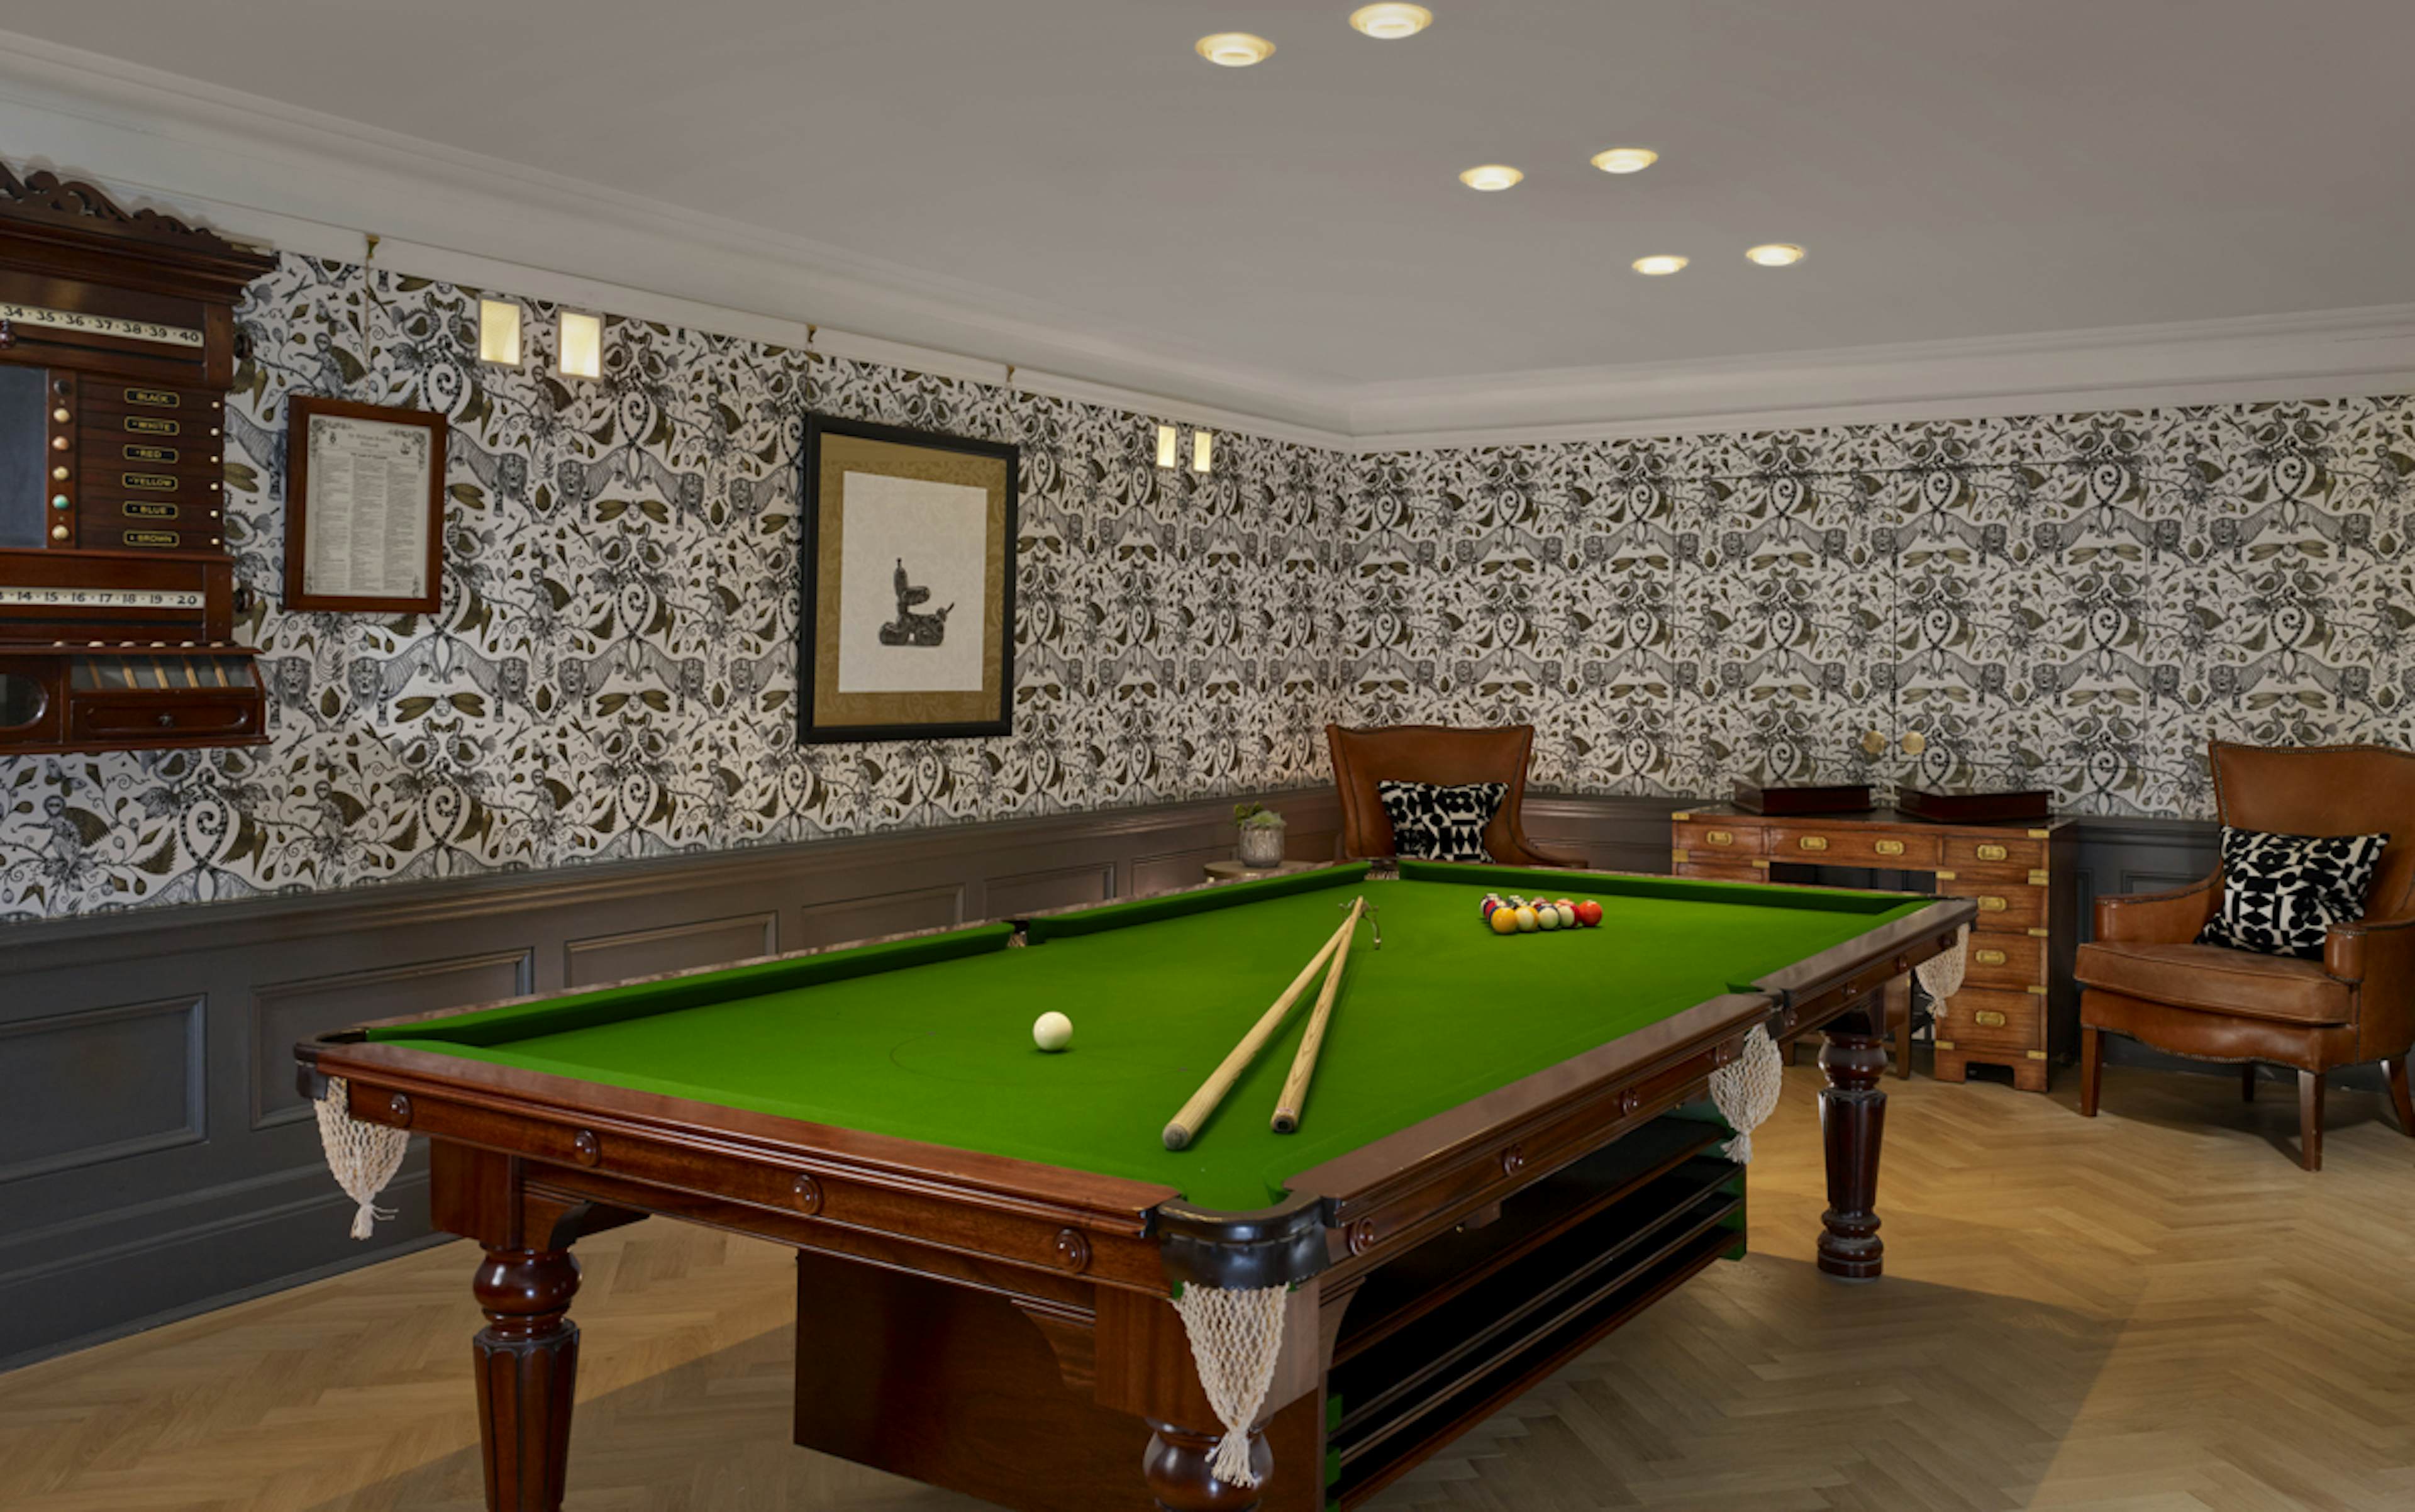 The Residence at Holmes Hotel London - The Billiards Room image 1